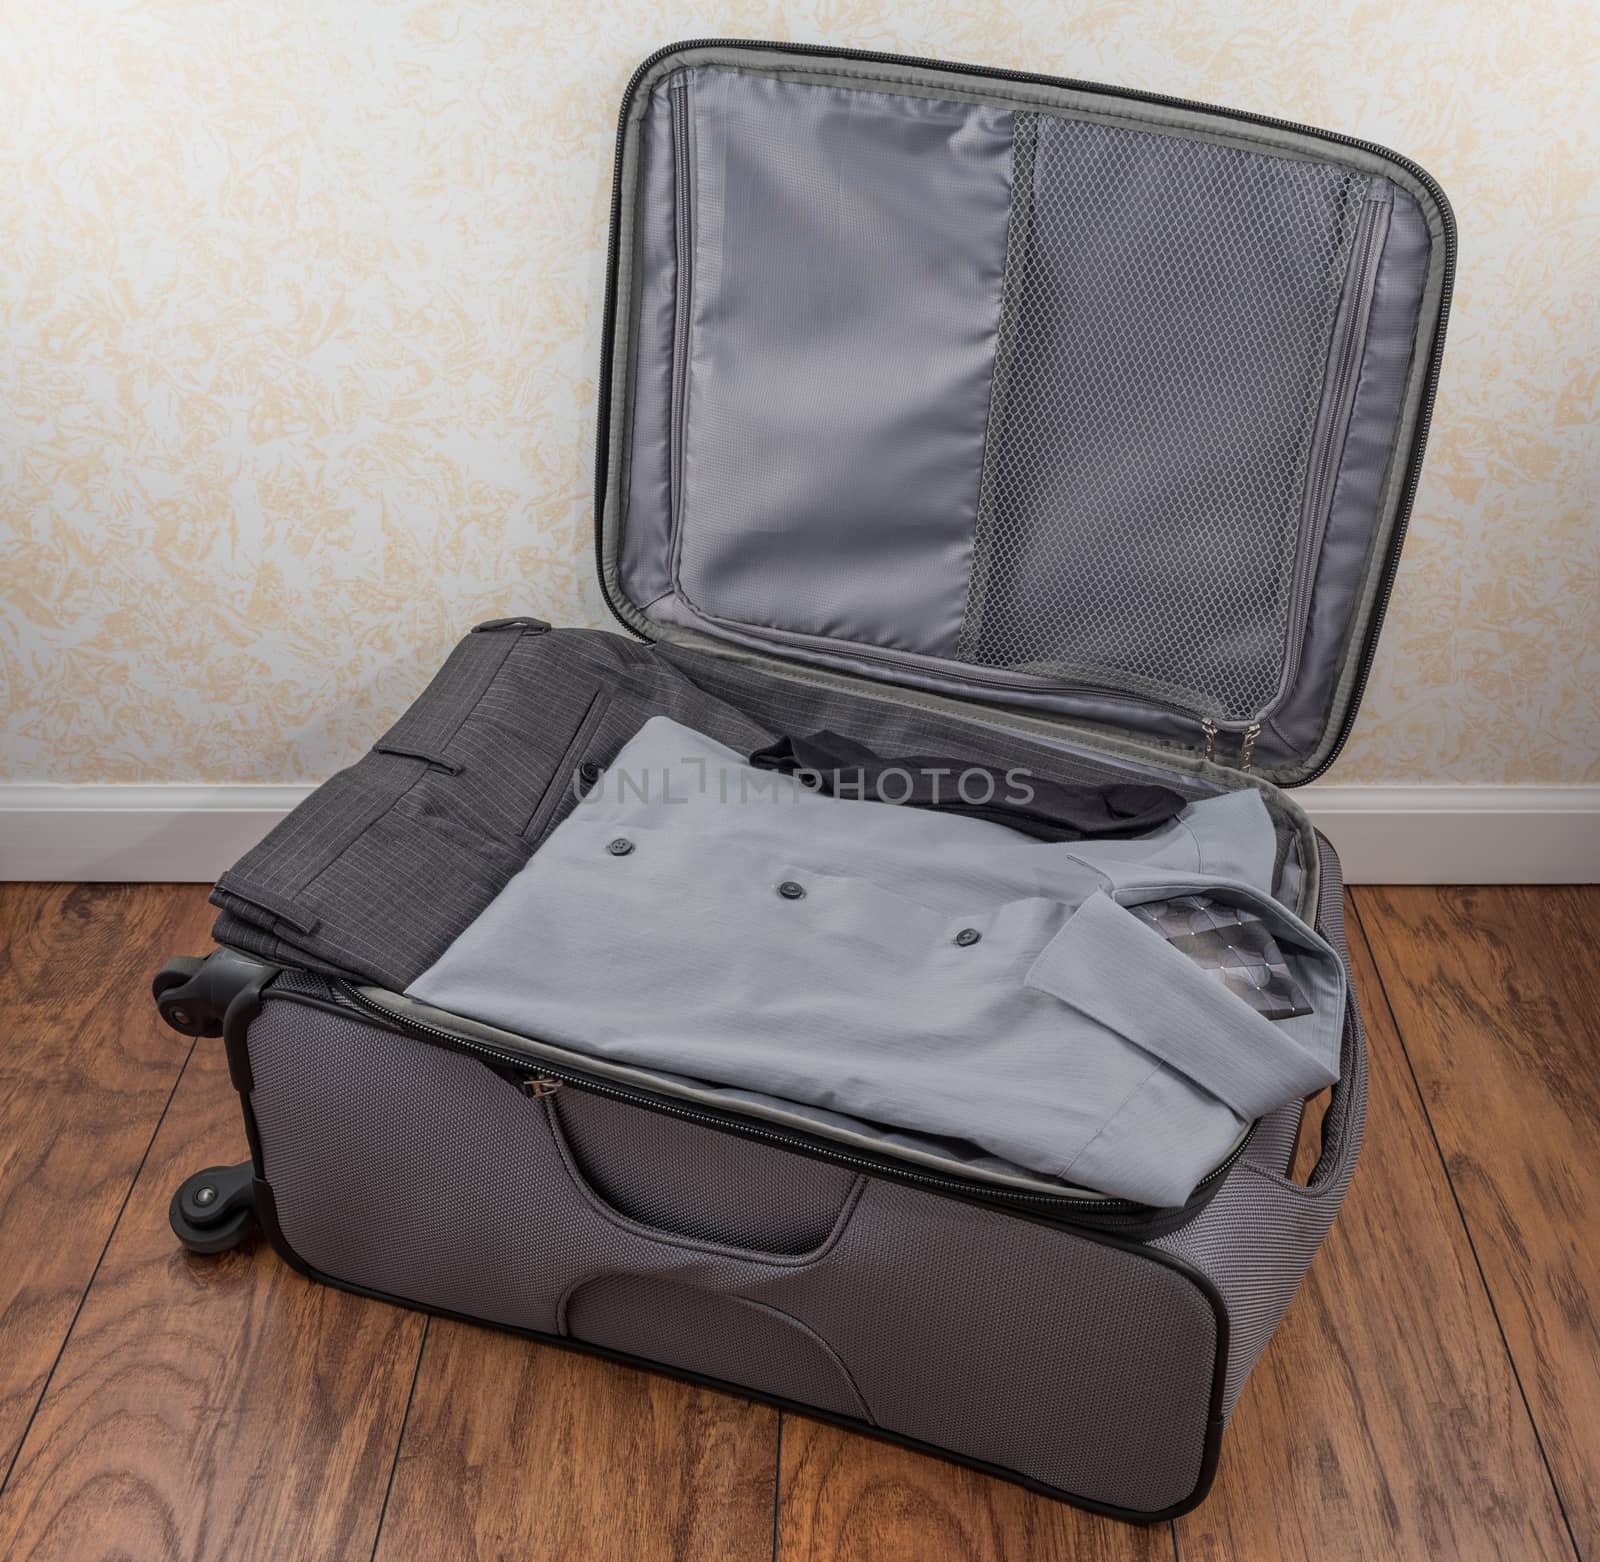 Mens Packed Suitcase by krisblackphotography